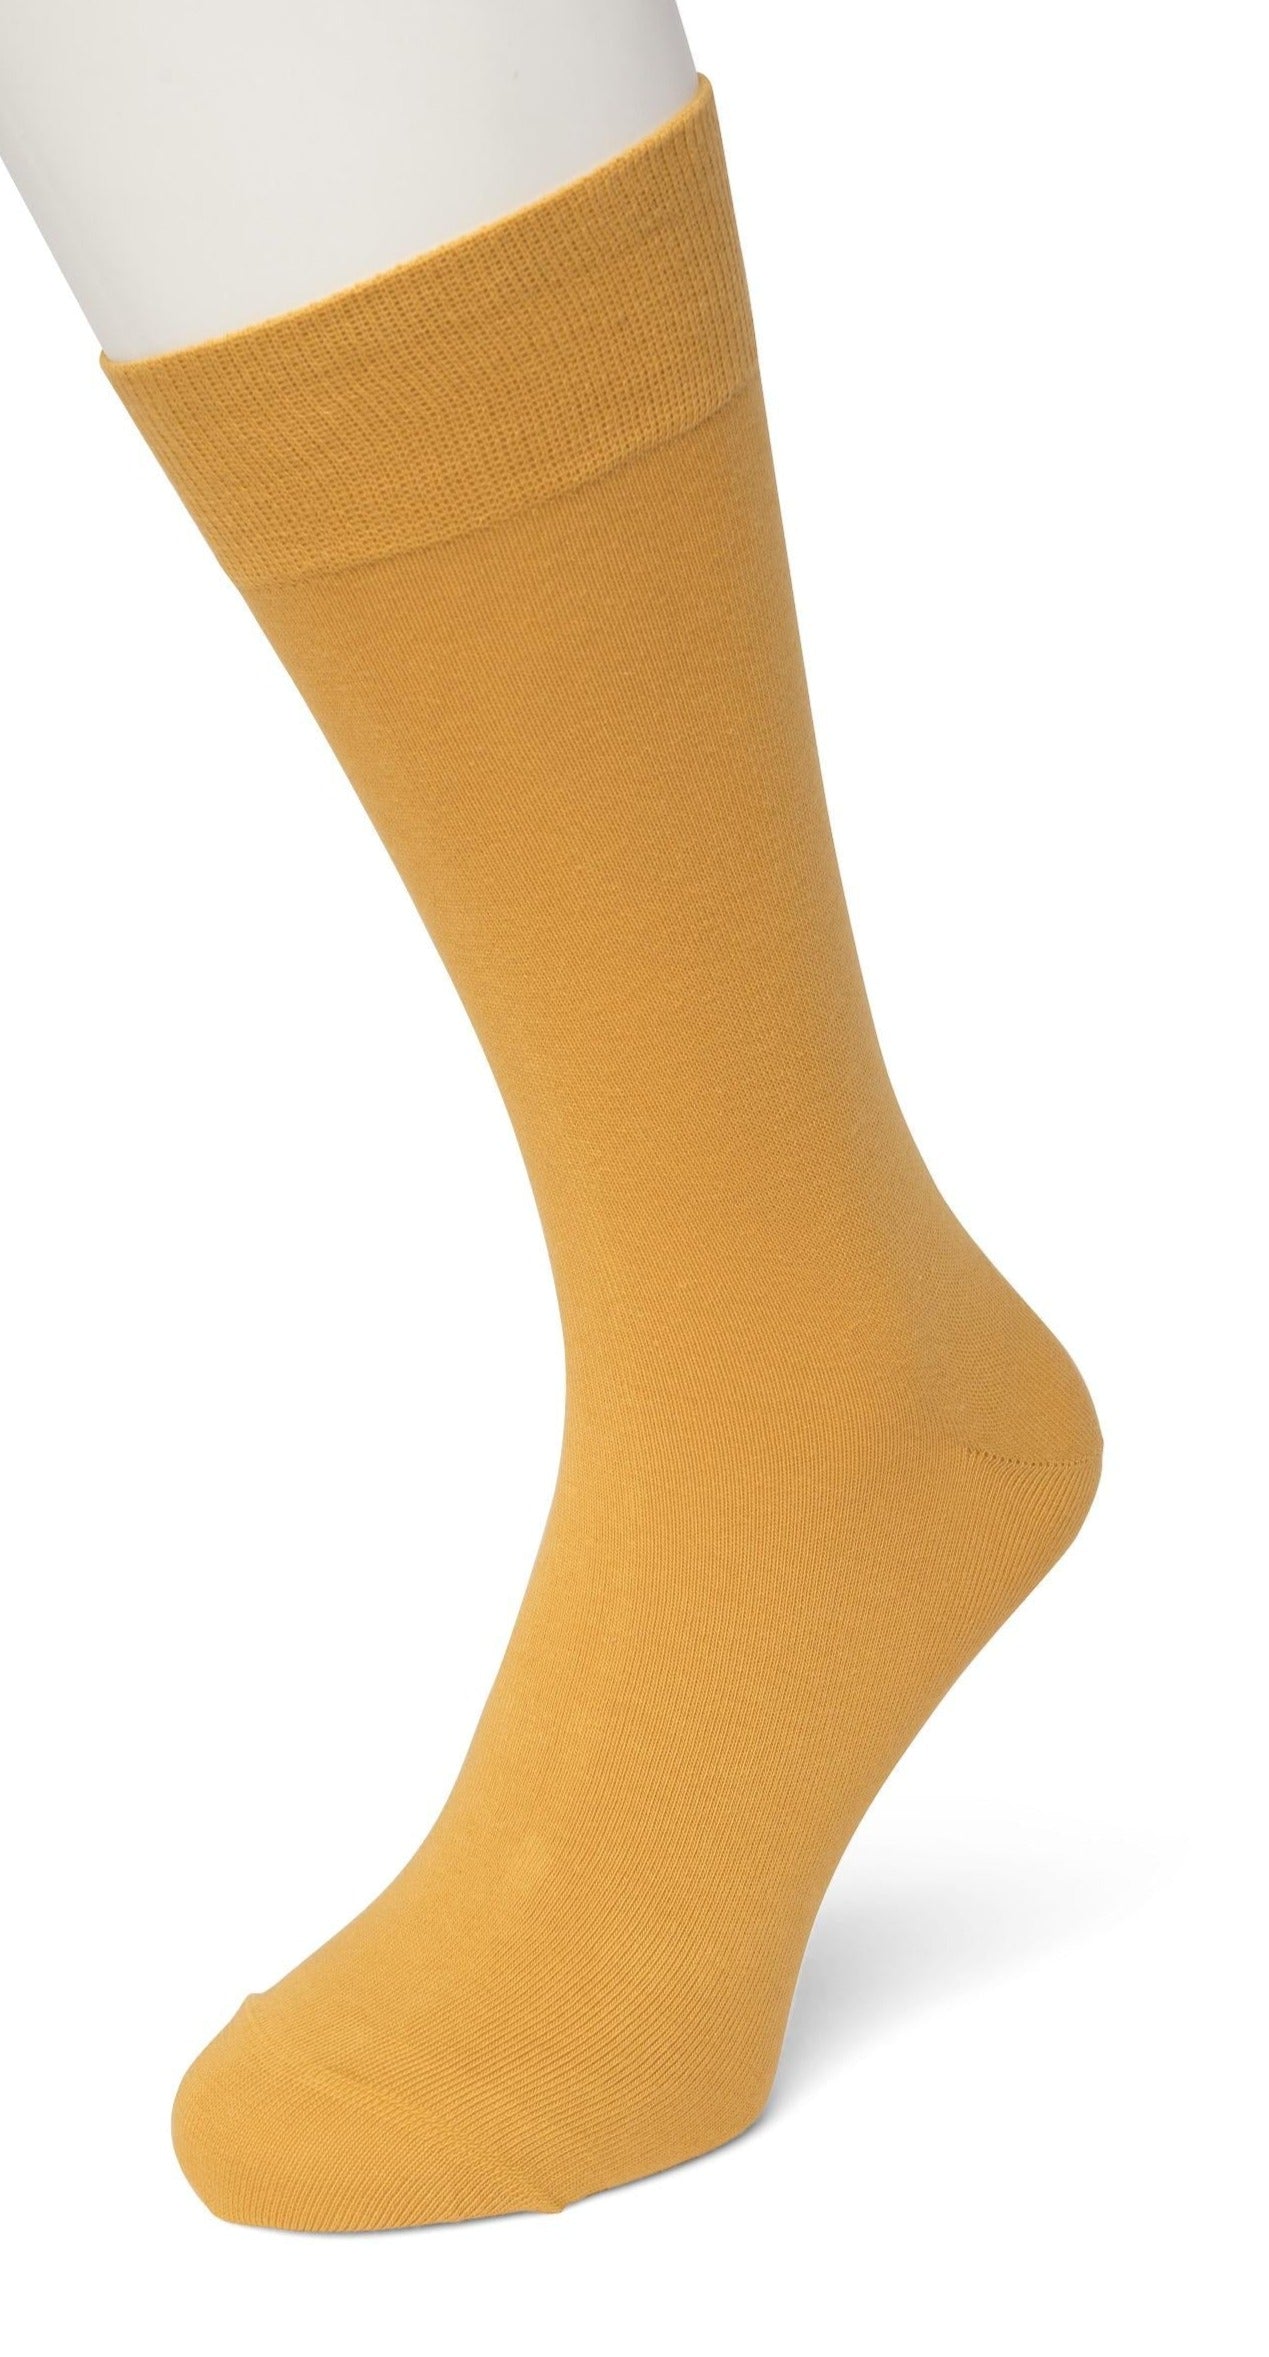 Bonnie Doon 83422 / BD632401 Cotton Sock -  Pale Mustard (ochre) ankle socks available in men and women sizes